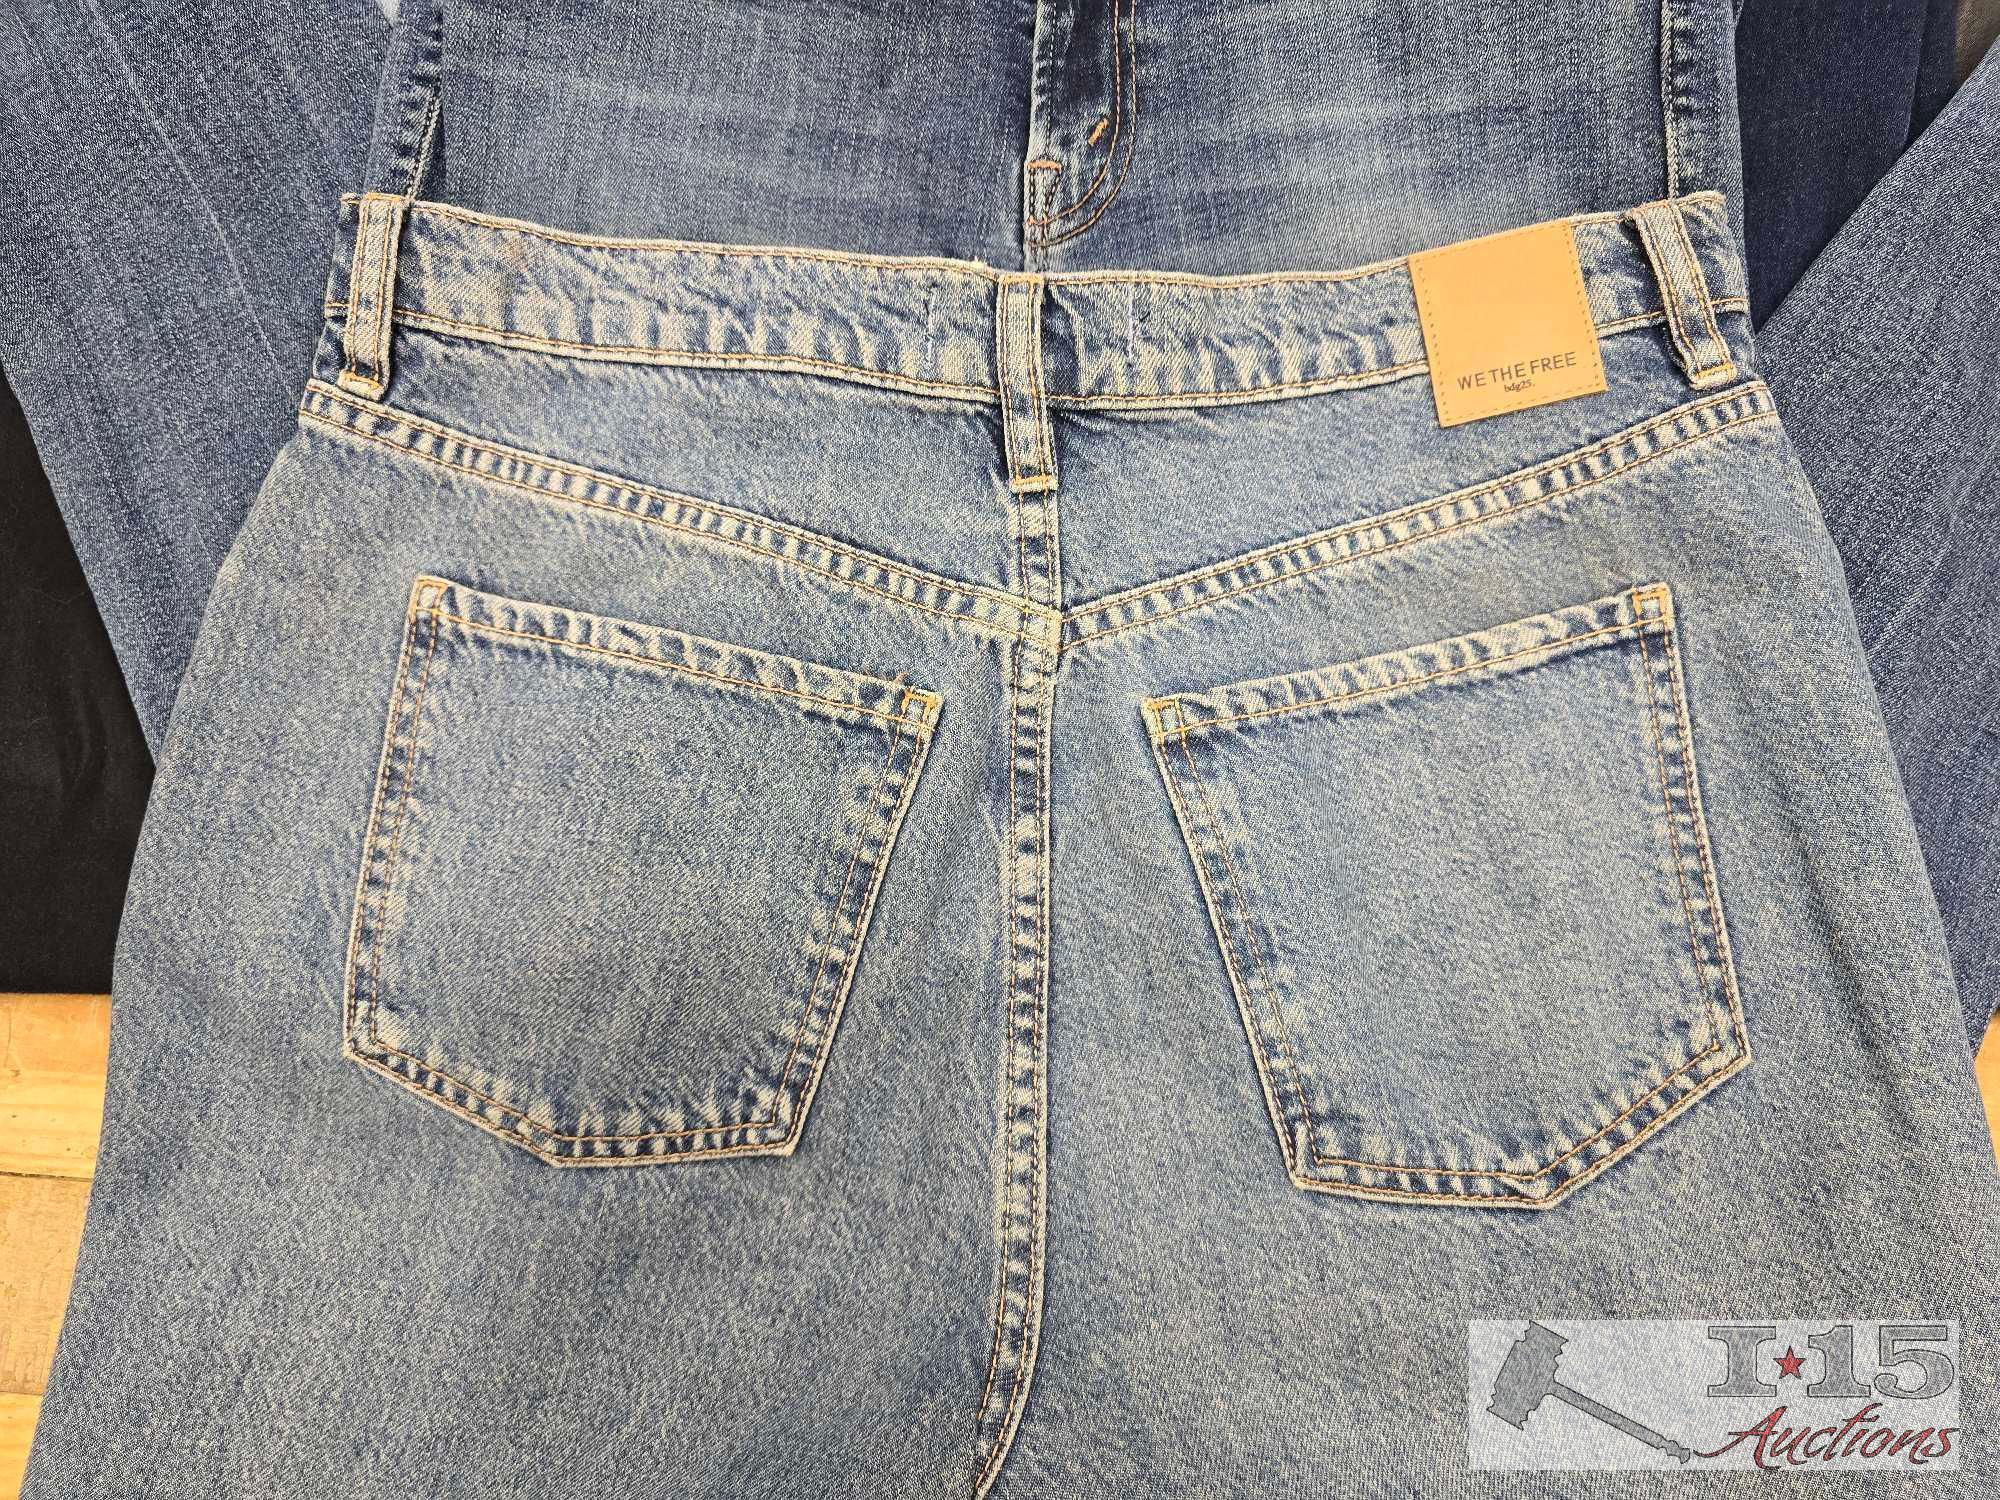 (11) Women's High End Jeans